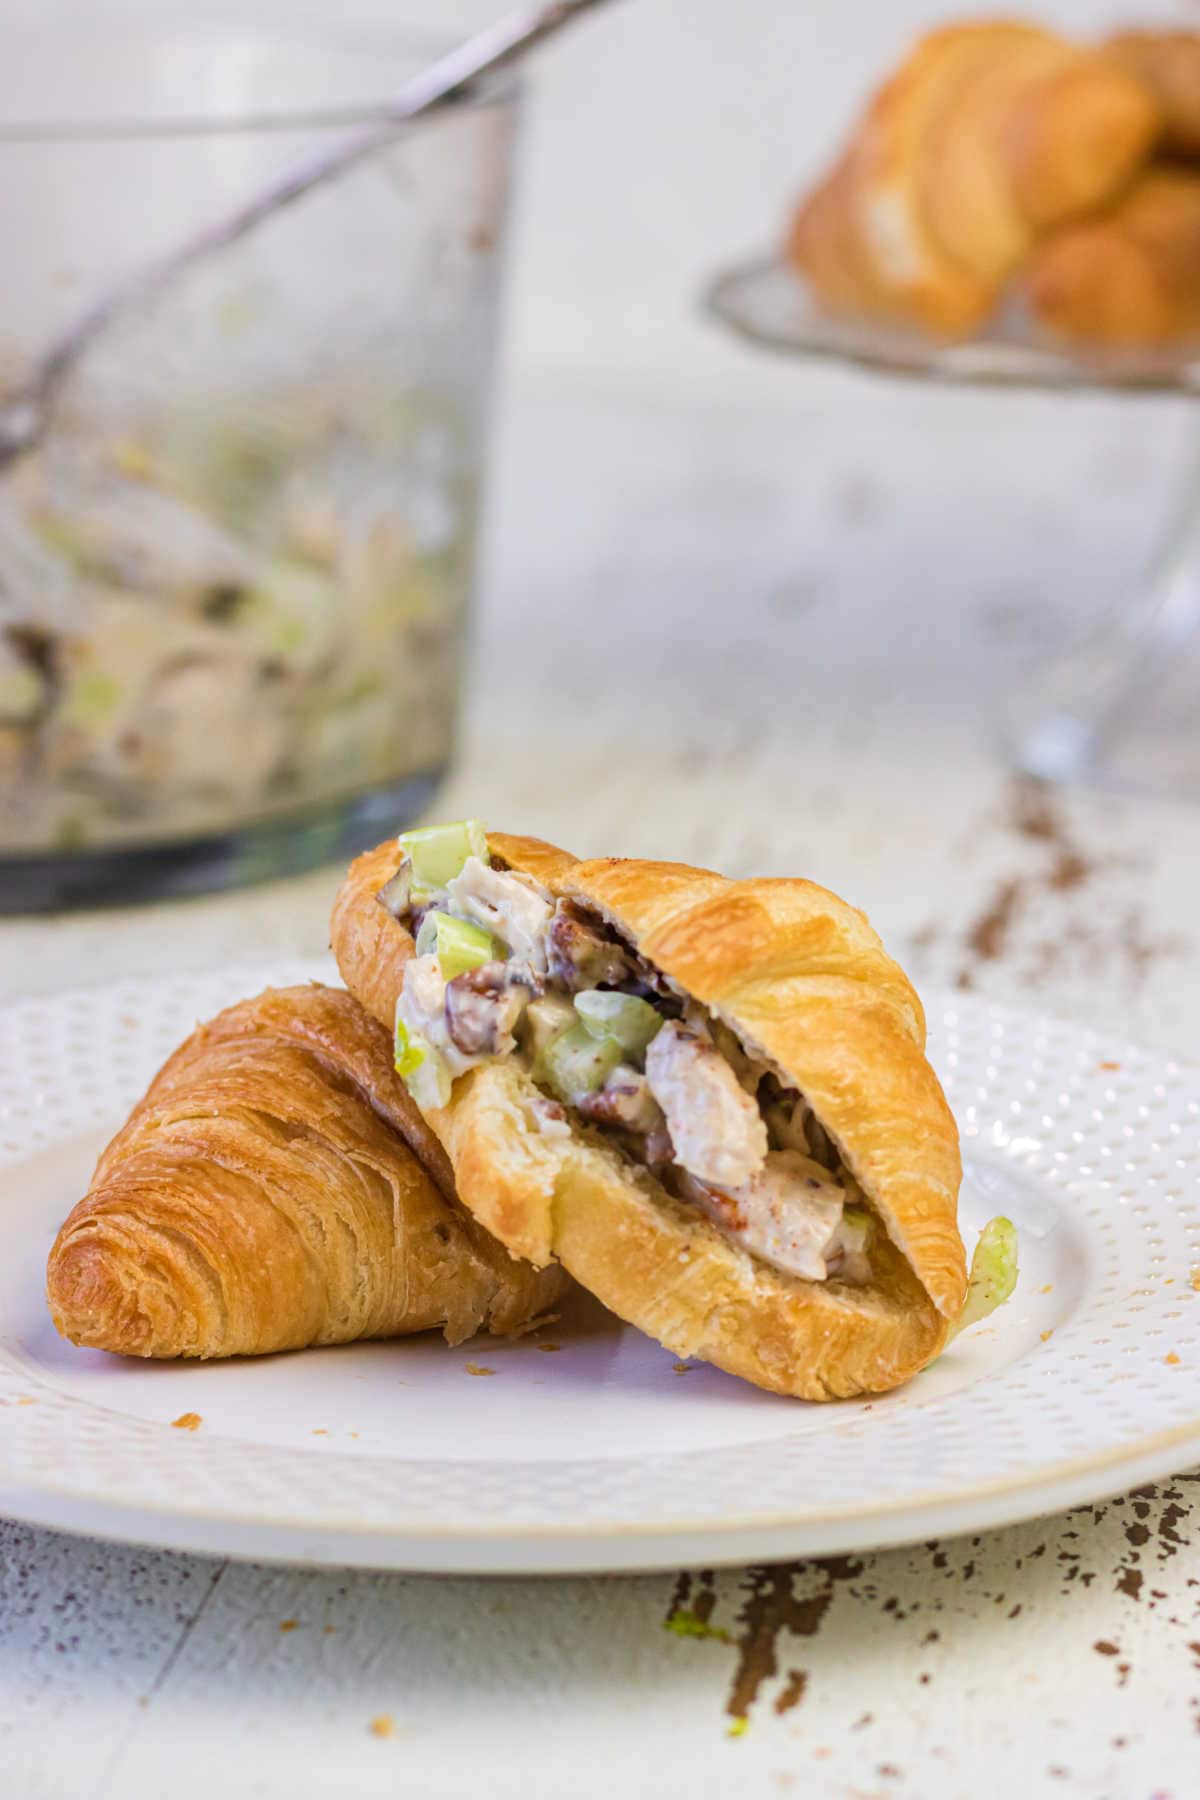 Recipe idea. Finished chicken salad in a croissant ready to be eaten.